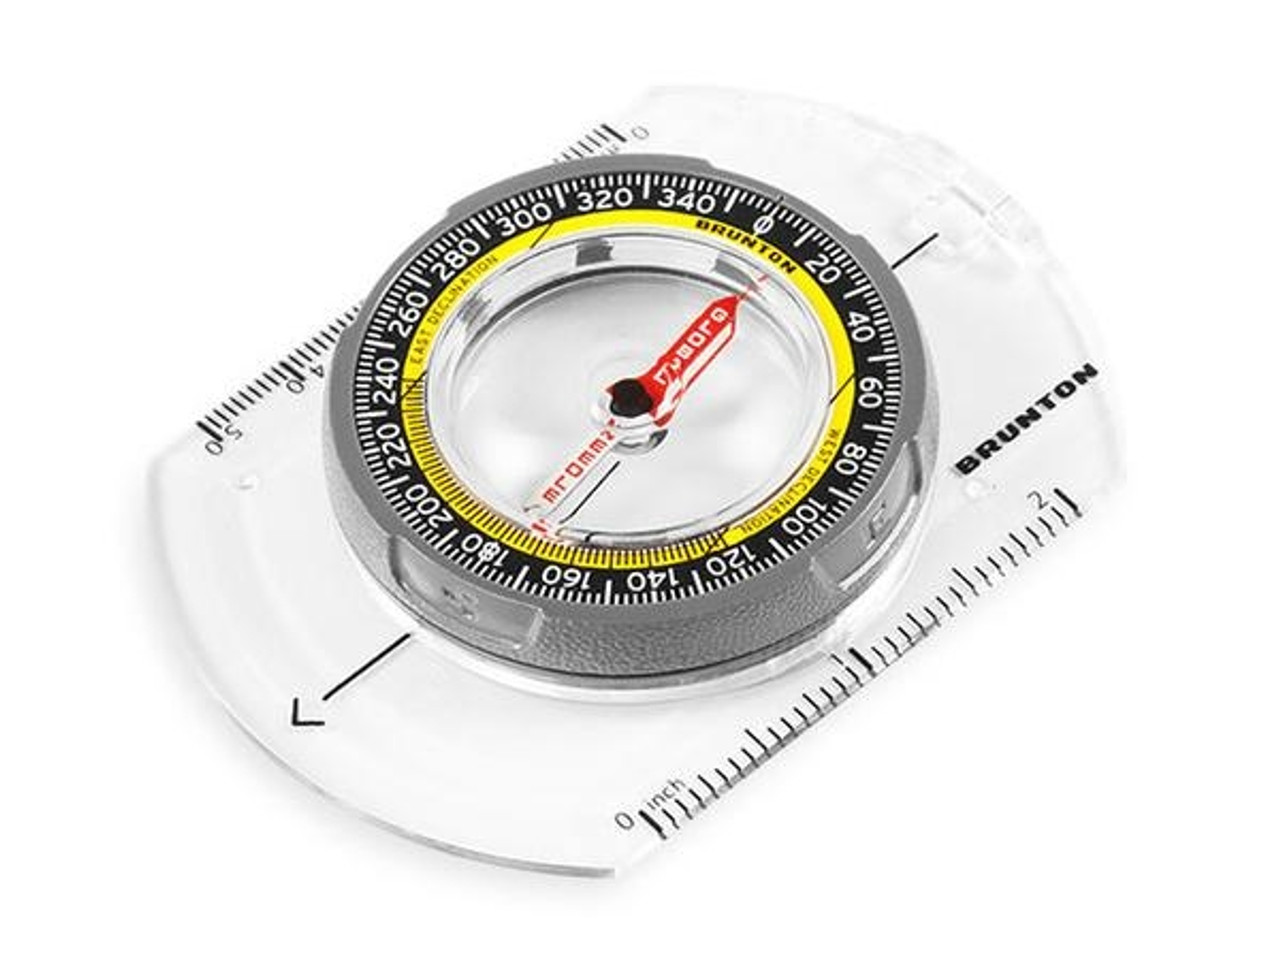 The classic scouting compass with modern updates, the TruArc™ 3 base plate compass is equipped with the TruArc™ Global Needle system in the characteristic form outdoorsmen have trusted for generations. Metric and standard scales, tool-less declination compensation, plus no-frills reliability make this a must for everyone’s outdoor pack.

OVERALL DIMENSIONS
 
2.5” x 3.5” x 0.5” (6.3 x 8.9 x 1.3cm)

WEIGHT
 
1.1 ounces (31 grams)

FEATURES
TruArcTM Global Needle; 2 degree resolution; Inch/CM

scales.